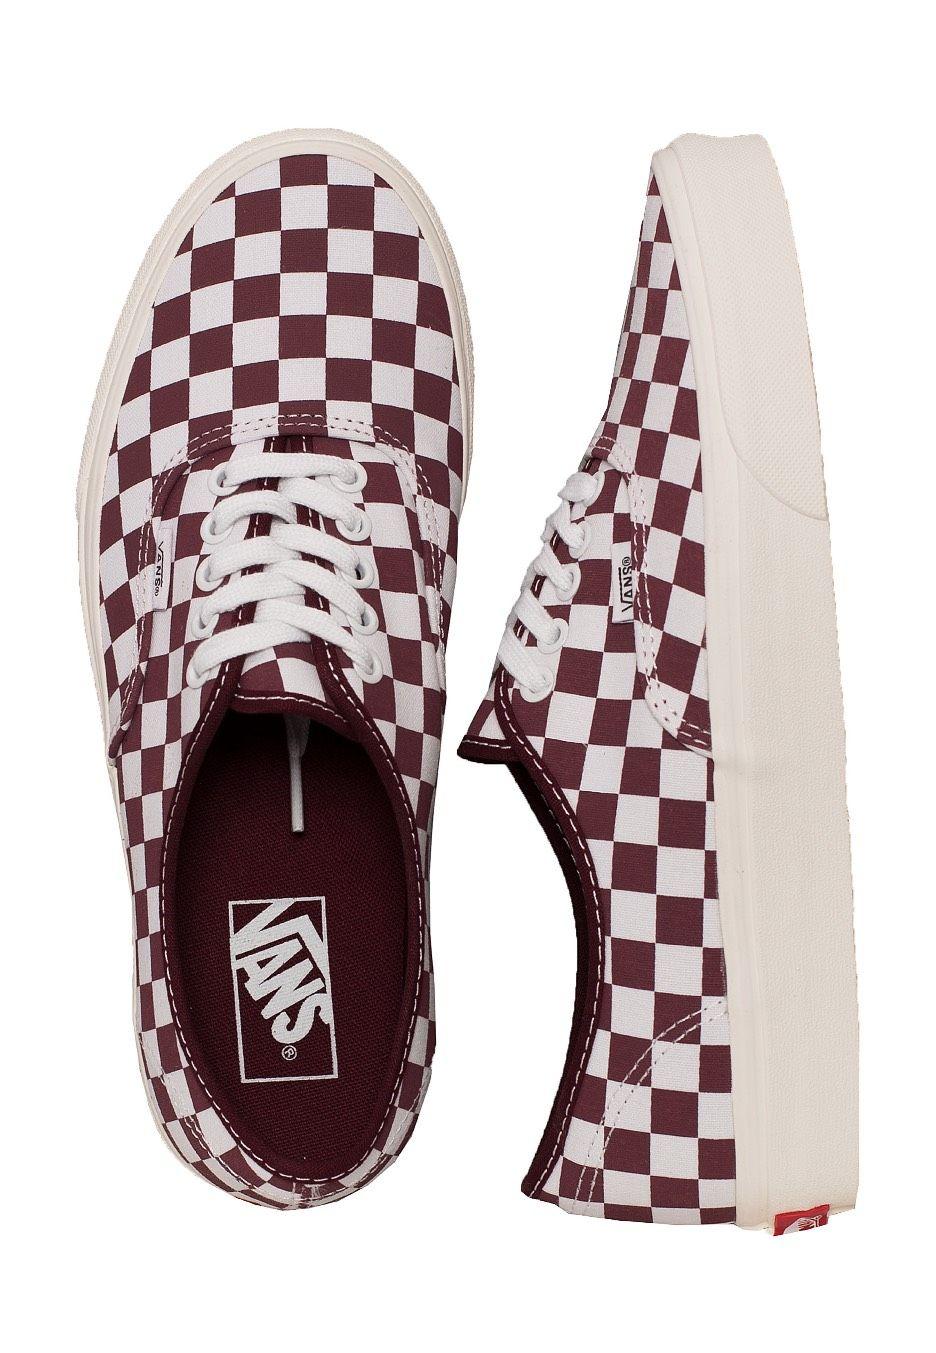 Checkerboard Vans Logo - Vans - Authentic Checkerboard Port Royale/Marshmallow - Girl Shoes ...